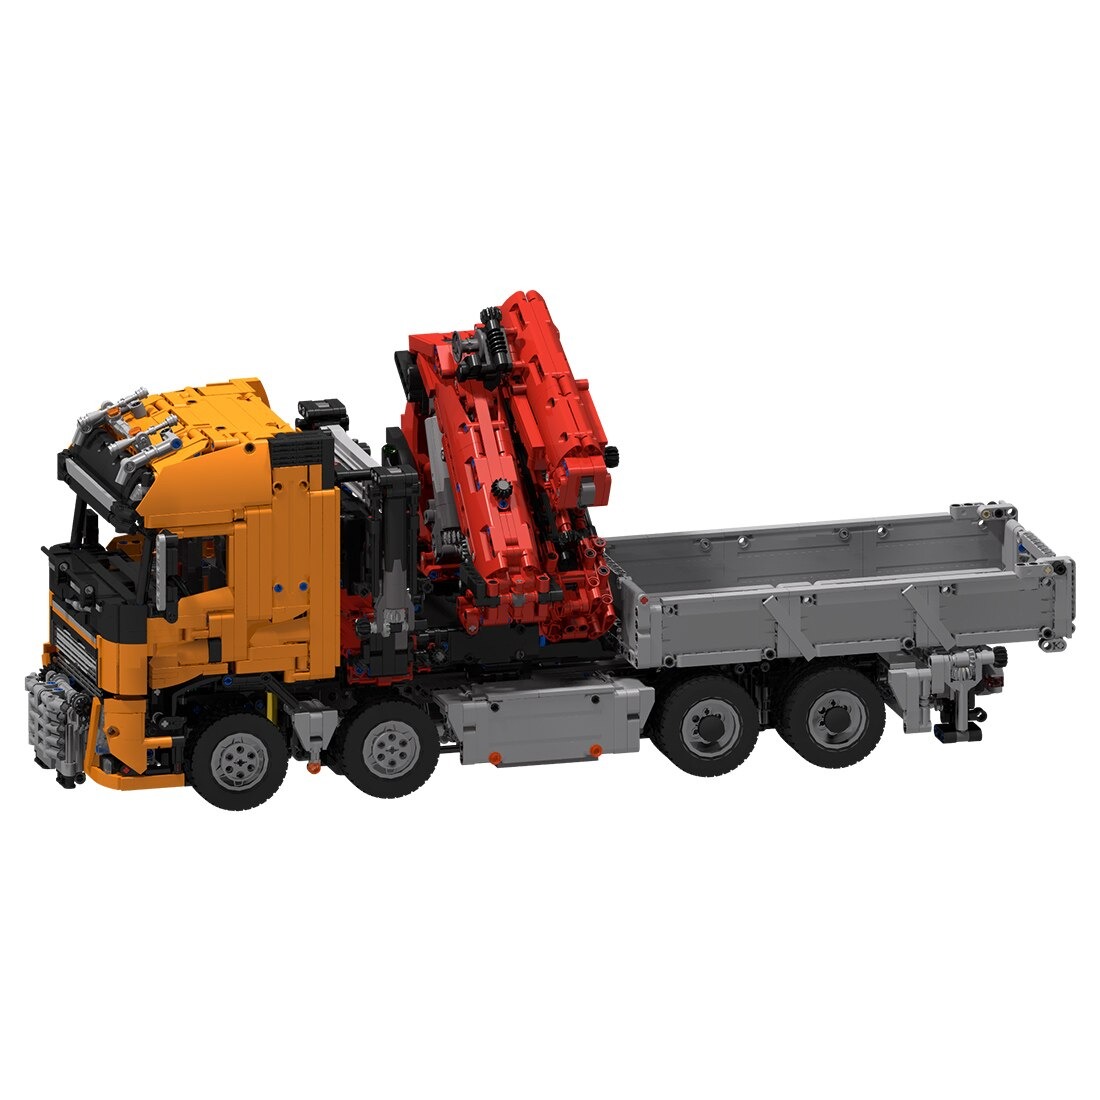 Volvo FH16 750 8x6 With Crane MOC-118230 Technic With 4351PCS